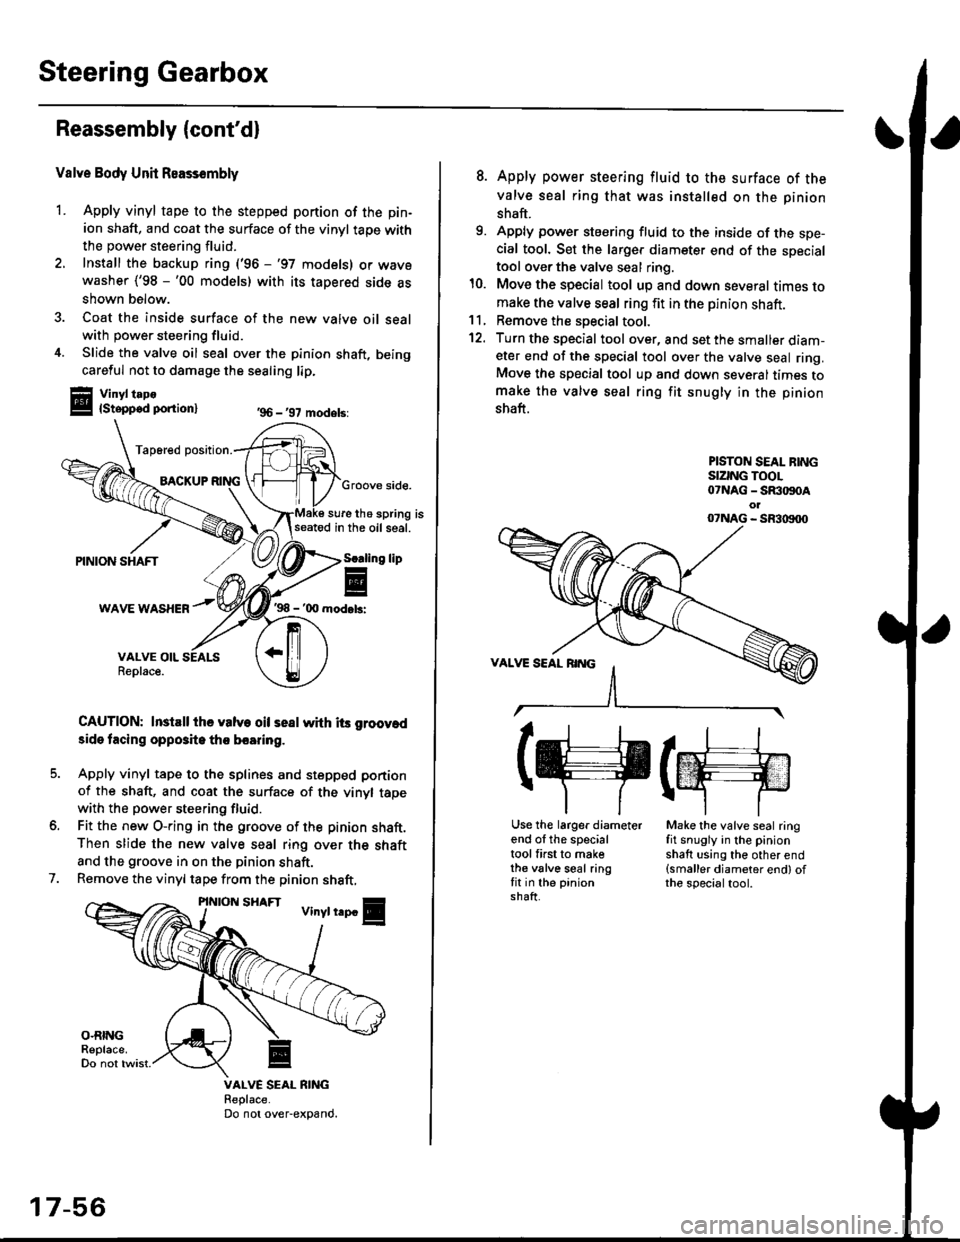 HONDA CIVIC 1996 6.G Owners Manual Steering Gearbox
Reassembly (contd)
Valve Body Unit Reassembly
1. Apply vinyl tape to the stepped portion of the pin-
ion shaft, and coat the surface of the vinyl taoe with
the power steering fluid.
